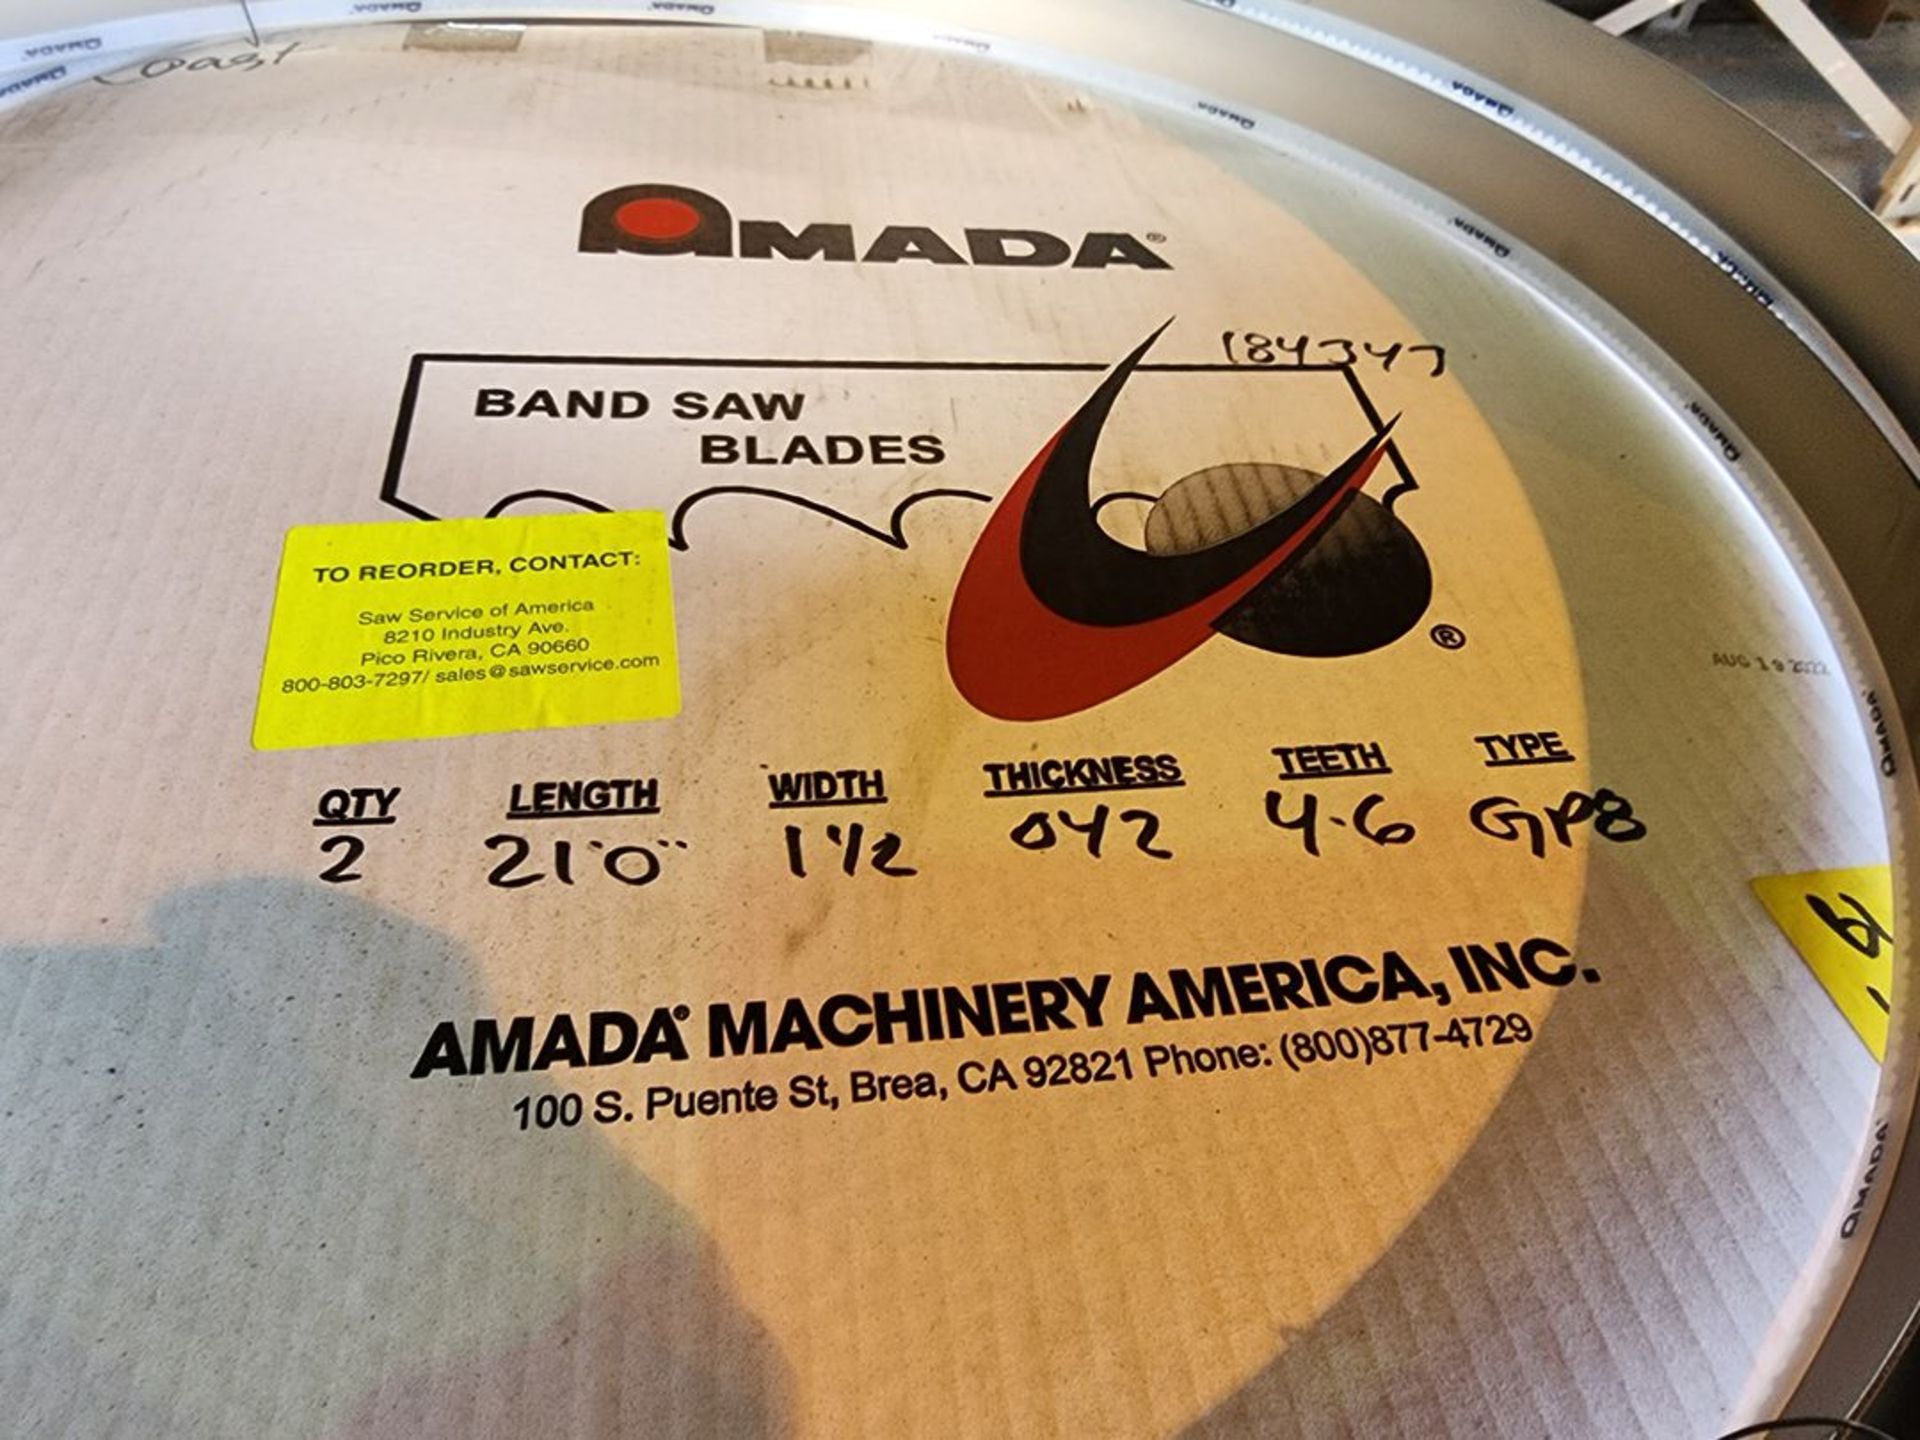 Amada Assorted Saw Blades (3) Boxes - Image 2 of 6